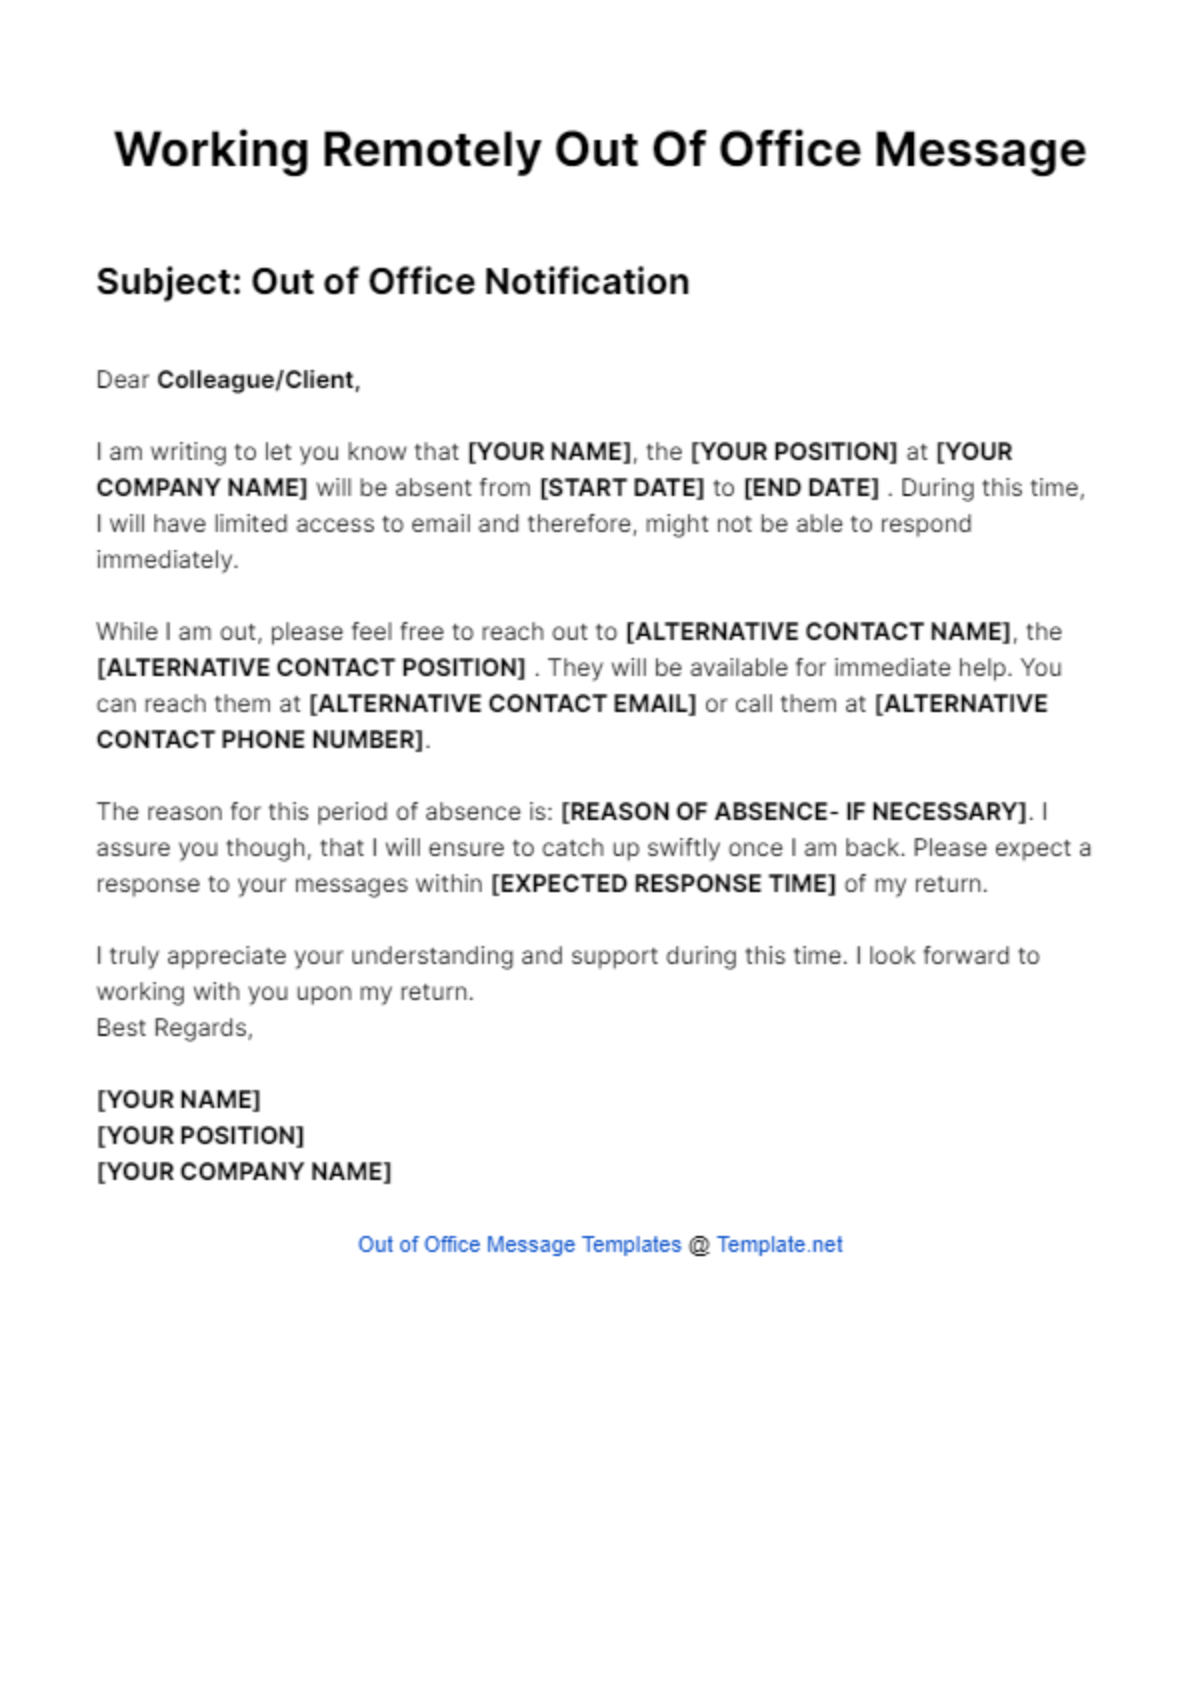 Working Remotely Out Of Office Message Template